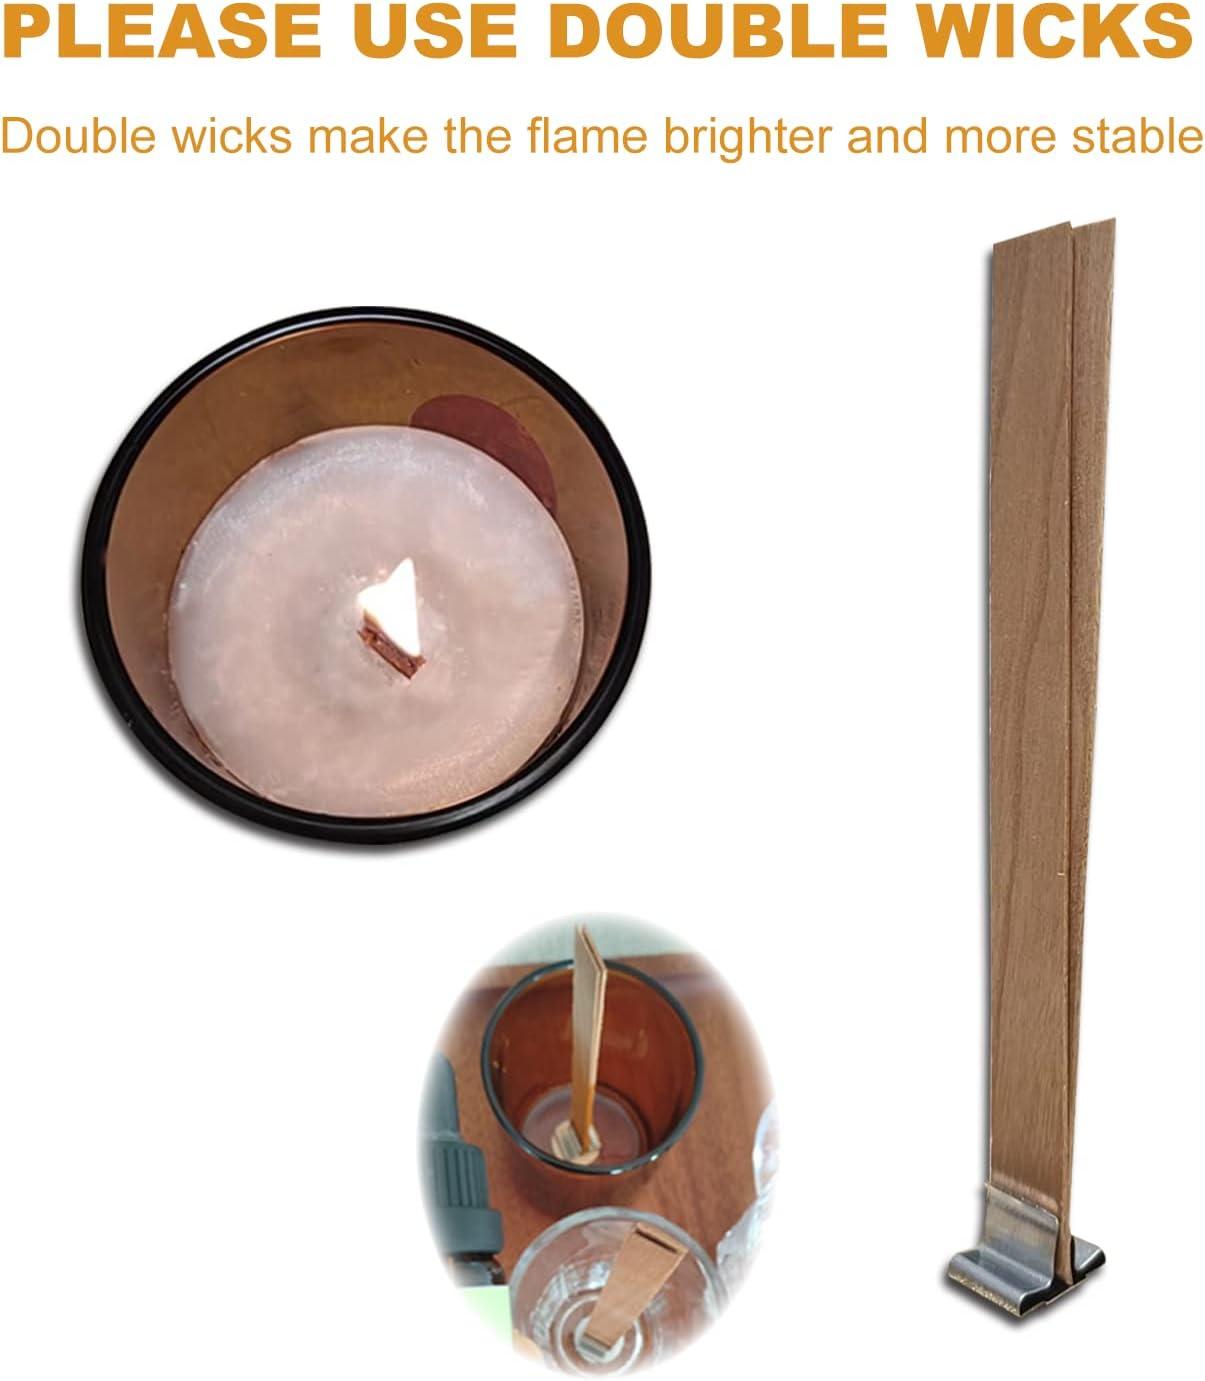 Wick Holder - The 100% highest quality products for you